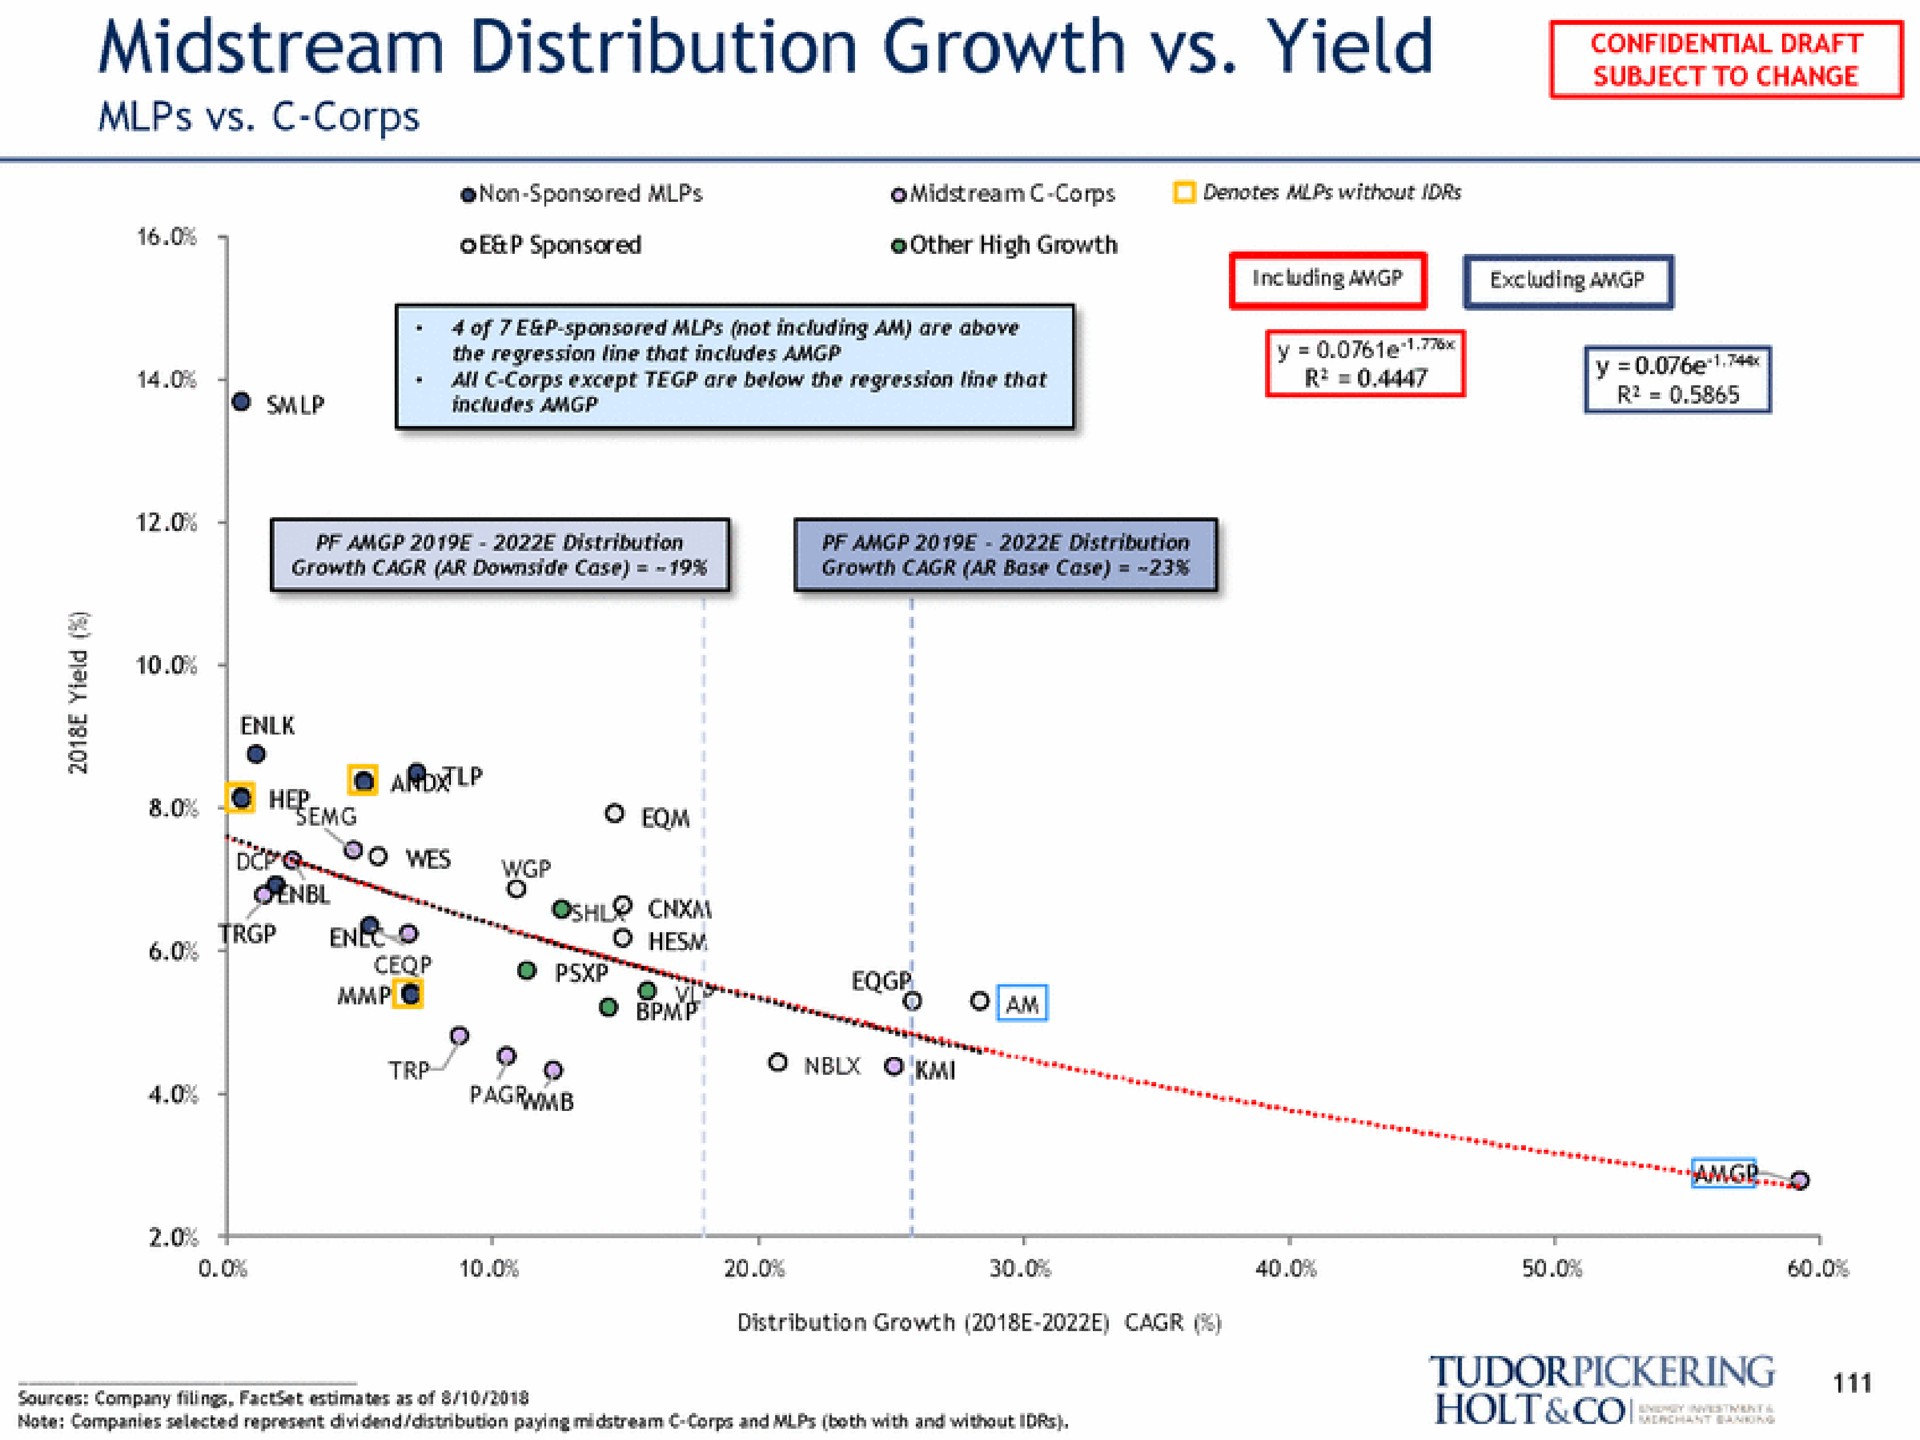 midstream distribution growth yield a | Tudor, Pickering, Holt & Co